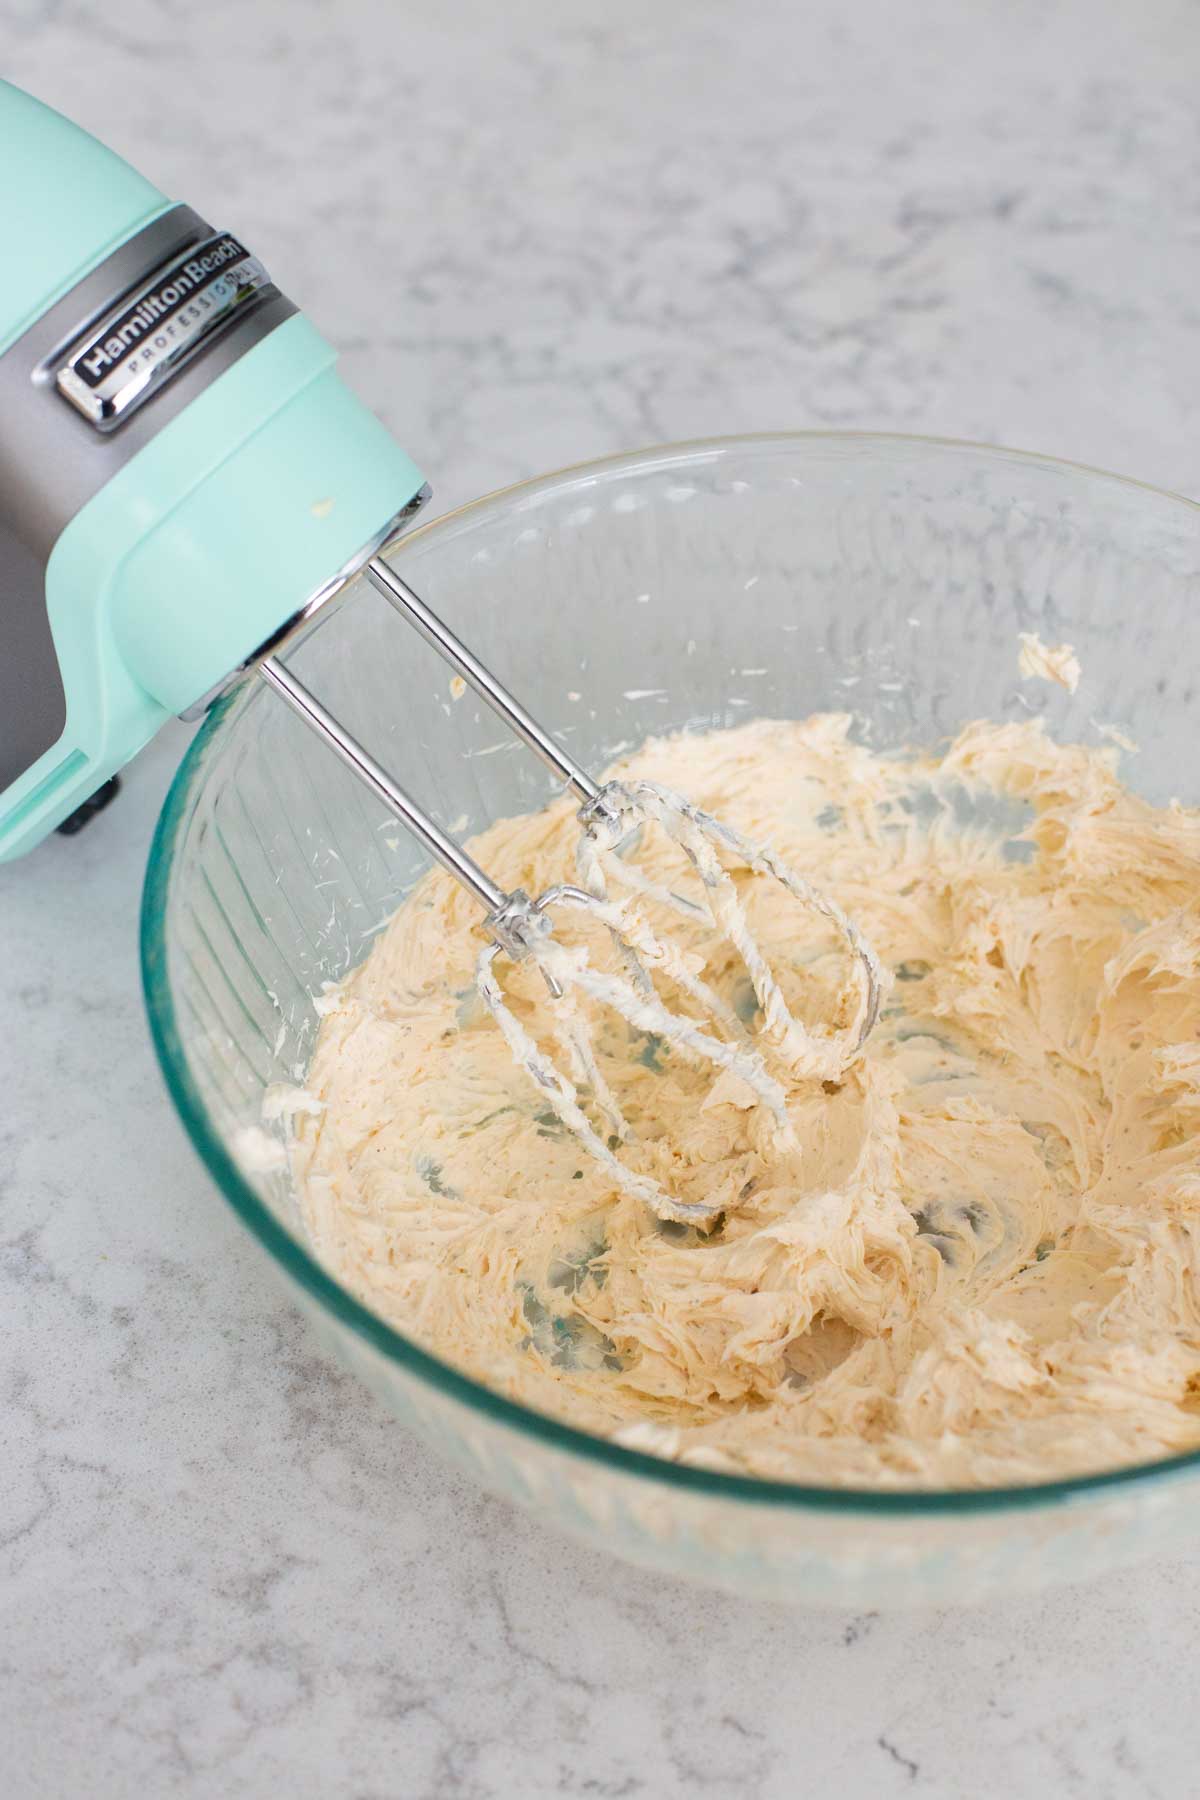 A mixing bowl filled with cream cheese and seasonings is being beaten by a hand mixer.